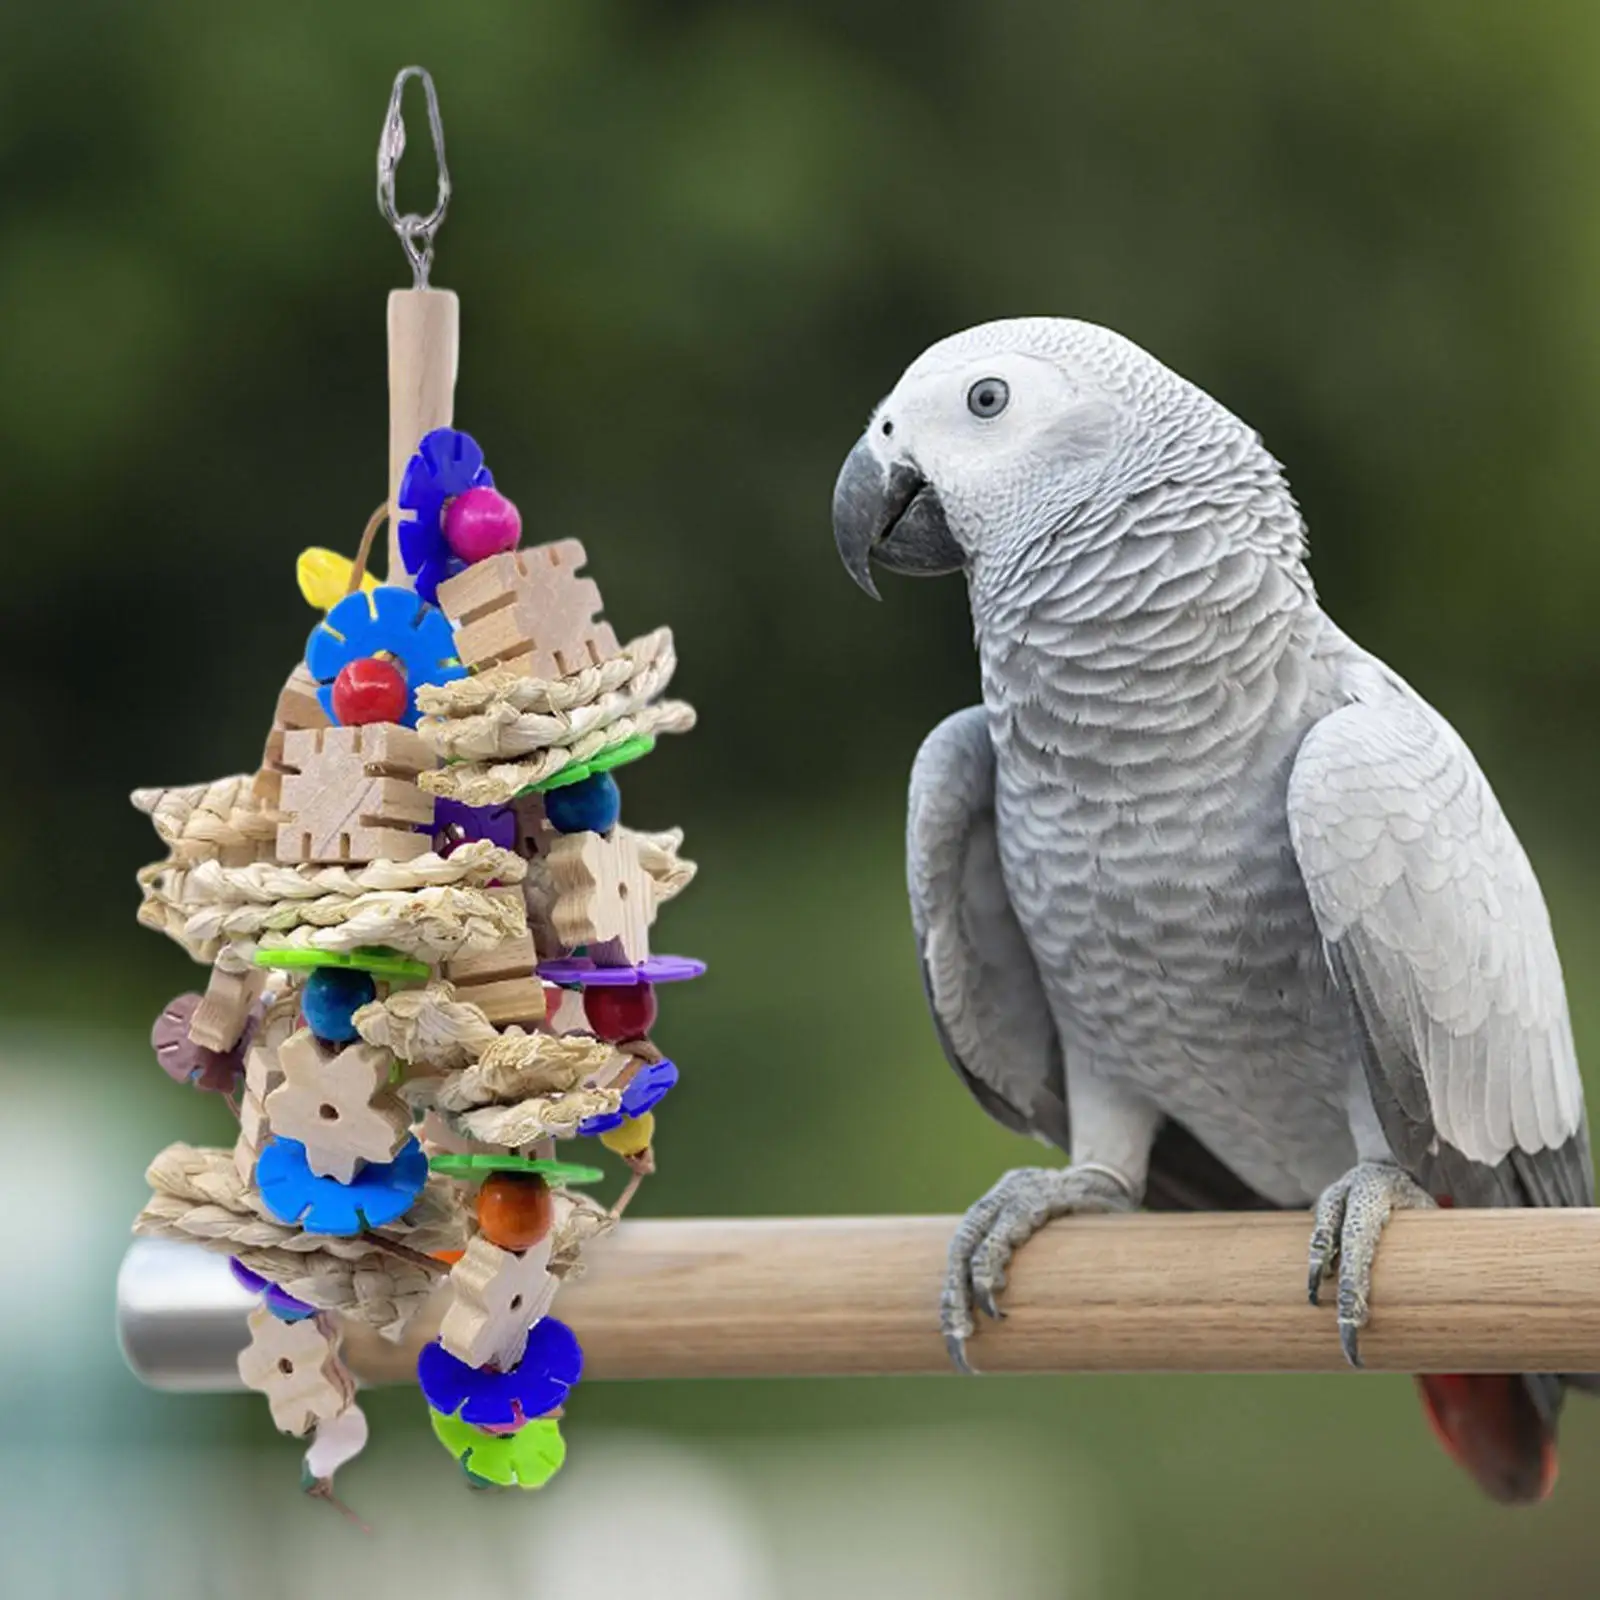 Parrot Bird Chewing Toy Blocks Lightweight Parrot Cage Bite Toy suits for Macaws Parrots Macaw Toy for Home Decoration